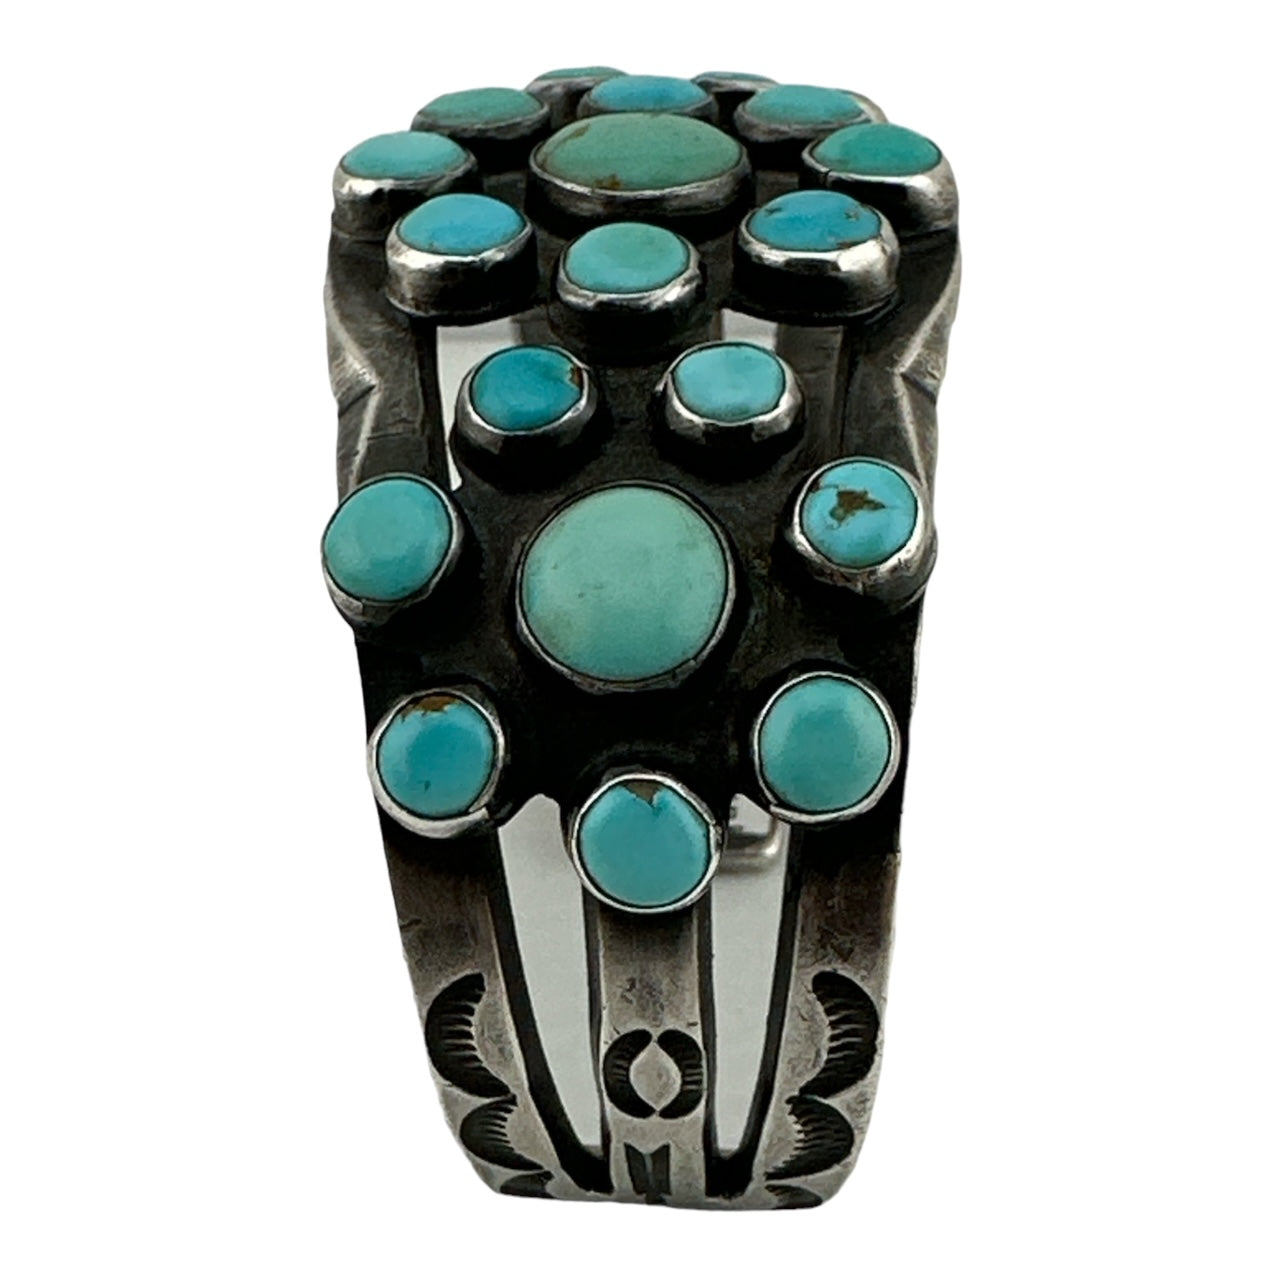 Vintage Navajo Ingot and Turquoise Cluster Bracelet, navajo jewelry for sale, turquoise jewelry for sale, telluride jewelry store, telluride gallery